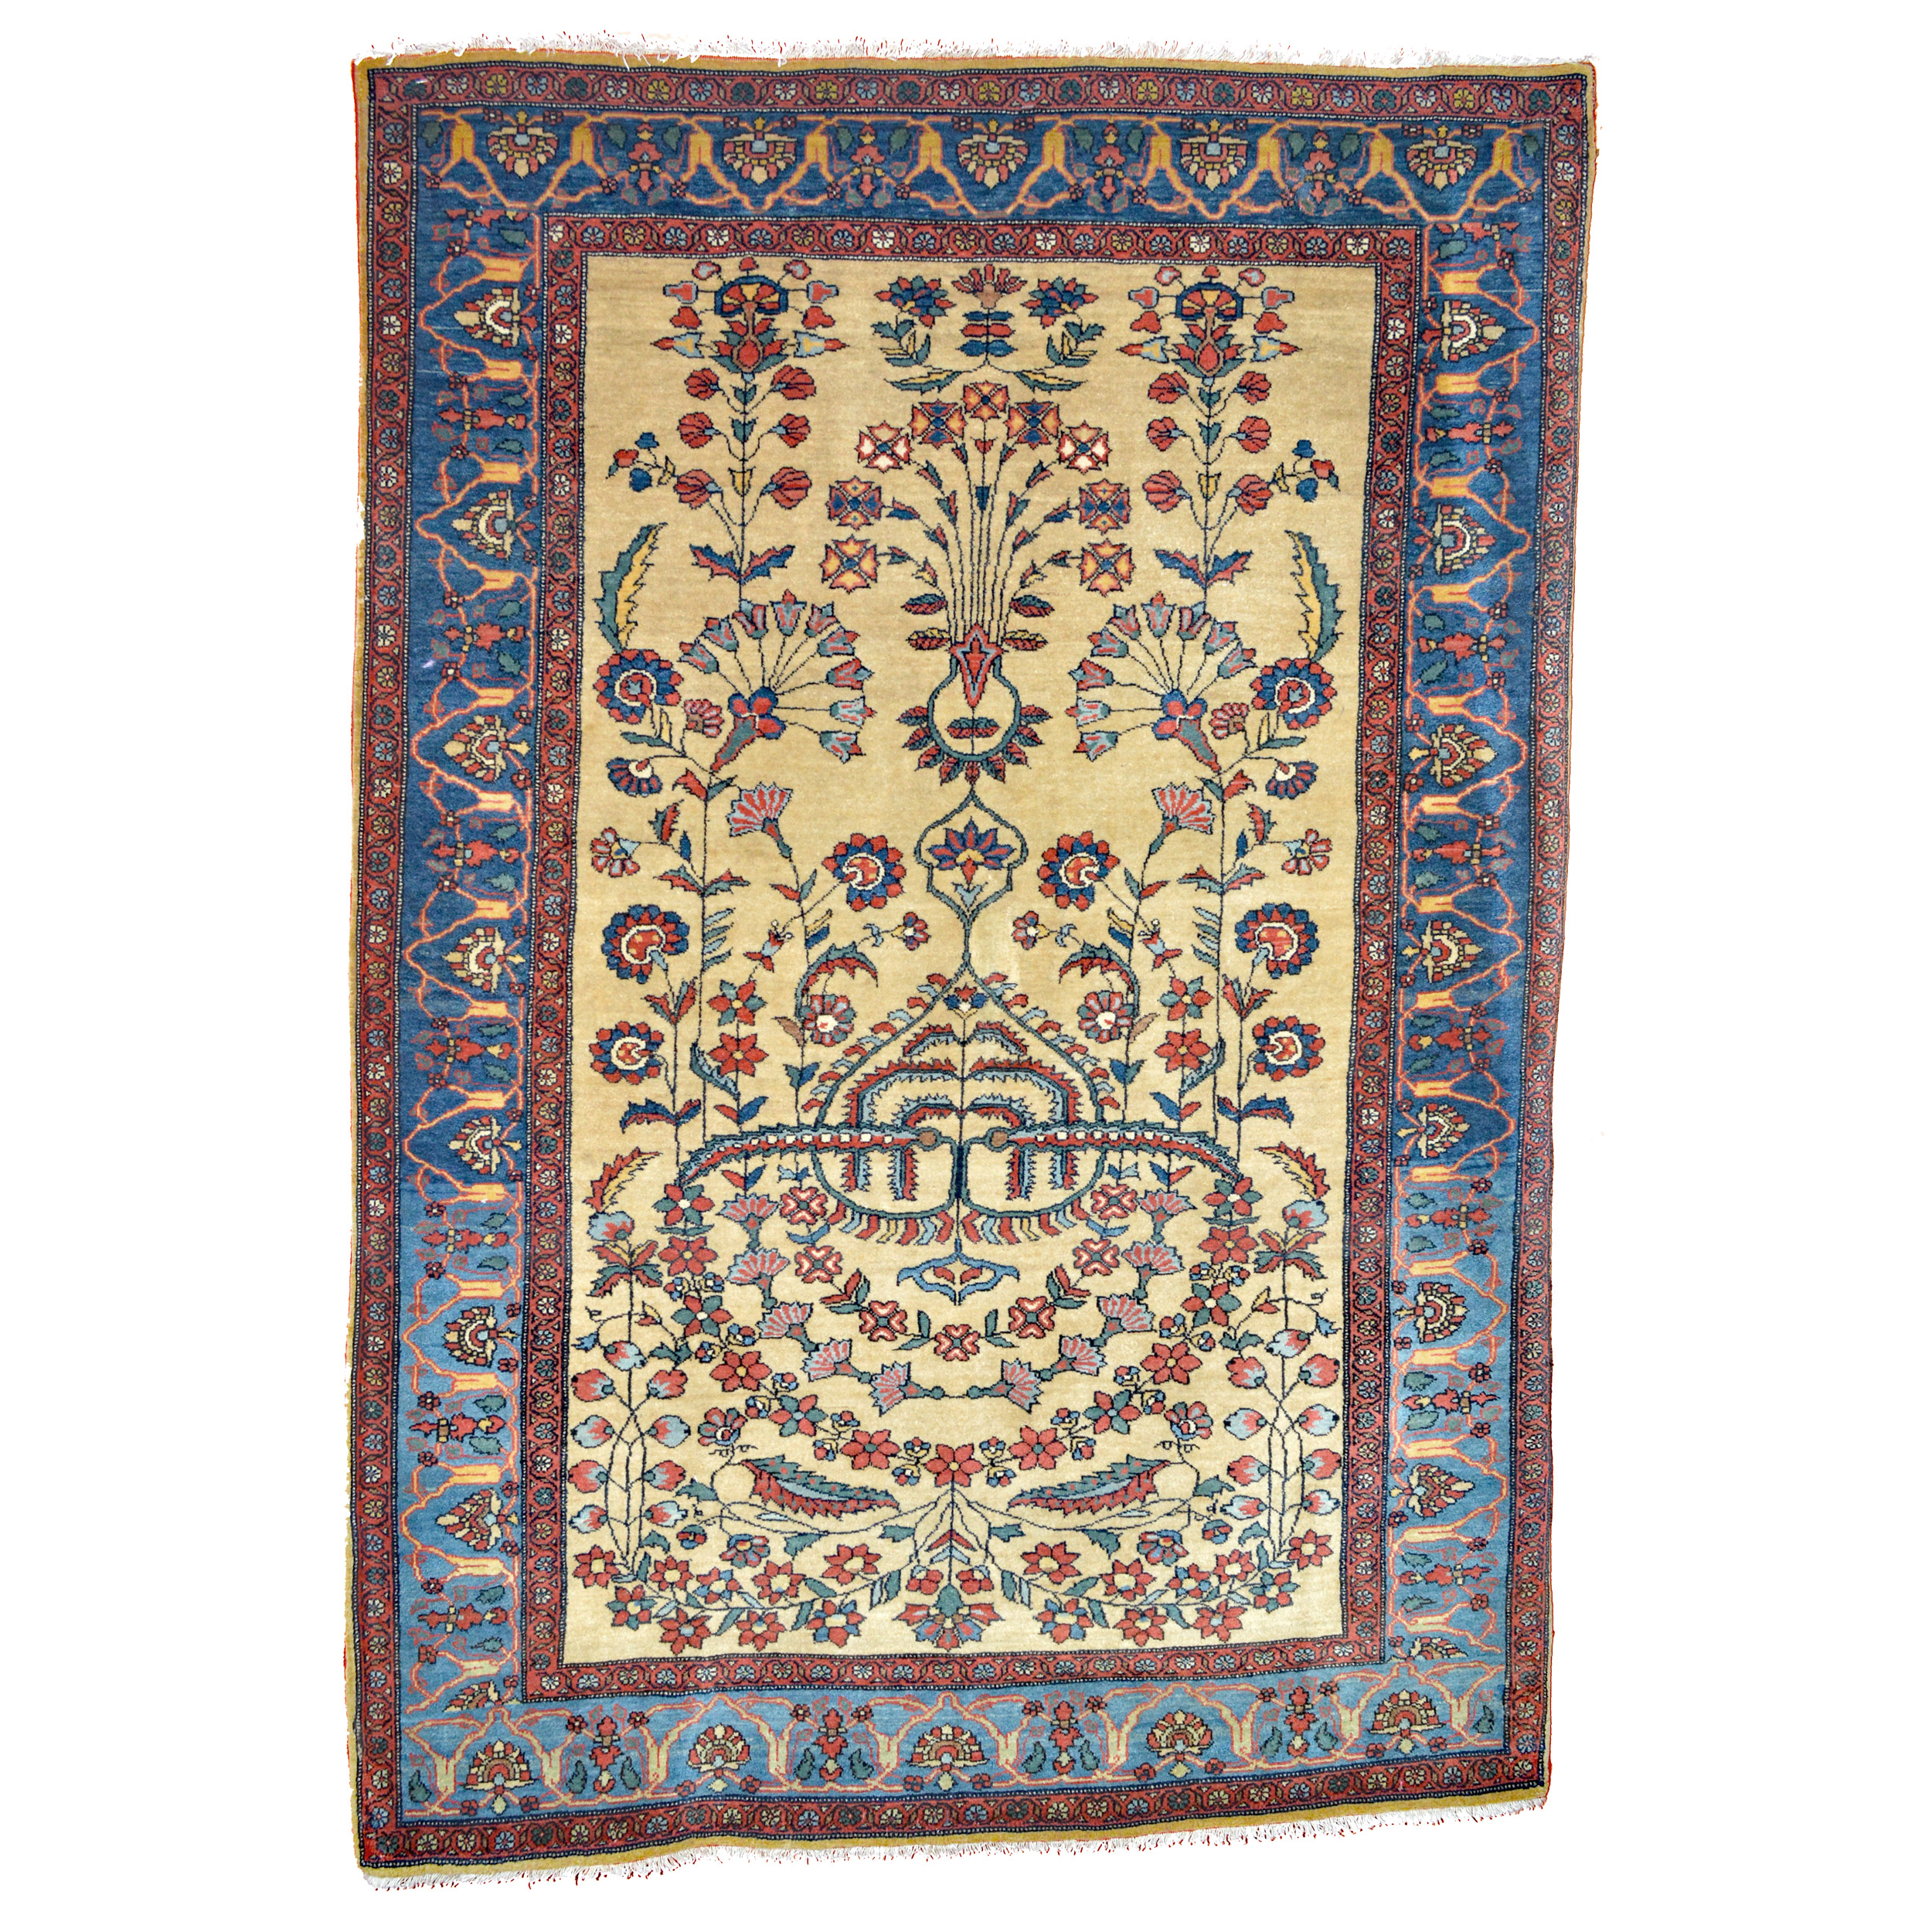 A densely woven antique Persian Fereghan Sarouk with an ivory field decorated with stylized leaves and flowers and framed by an abrashed sky blue to mid blue border - Douglas Stock Gallery, antique Orental rugs Boston Beacon Hill, Back Bay, Cambridge, Belmont, Concord, Wellesley, Weston, South Natick,MA area